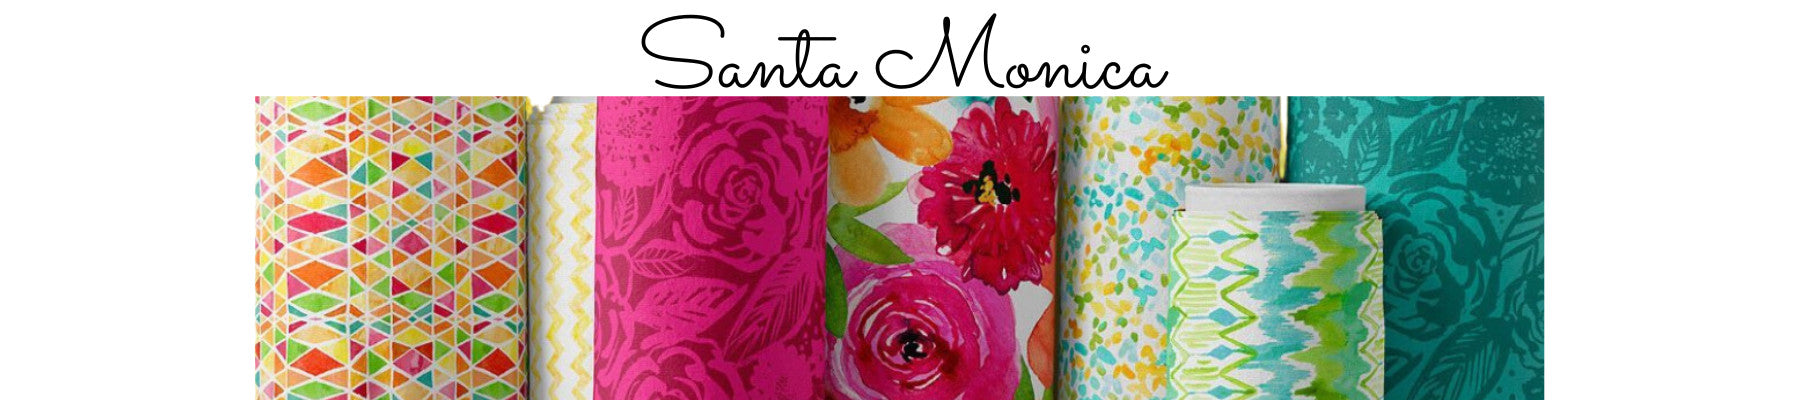 Rolls of fabric in bright spring colors of pink, turquoise and yellow.  Santa Monica fabric collection.